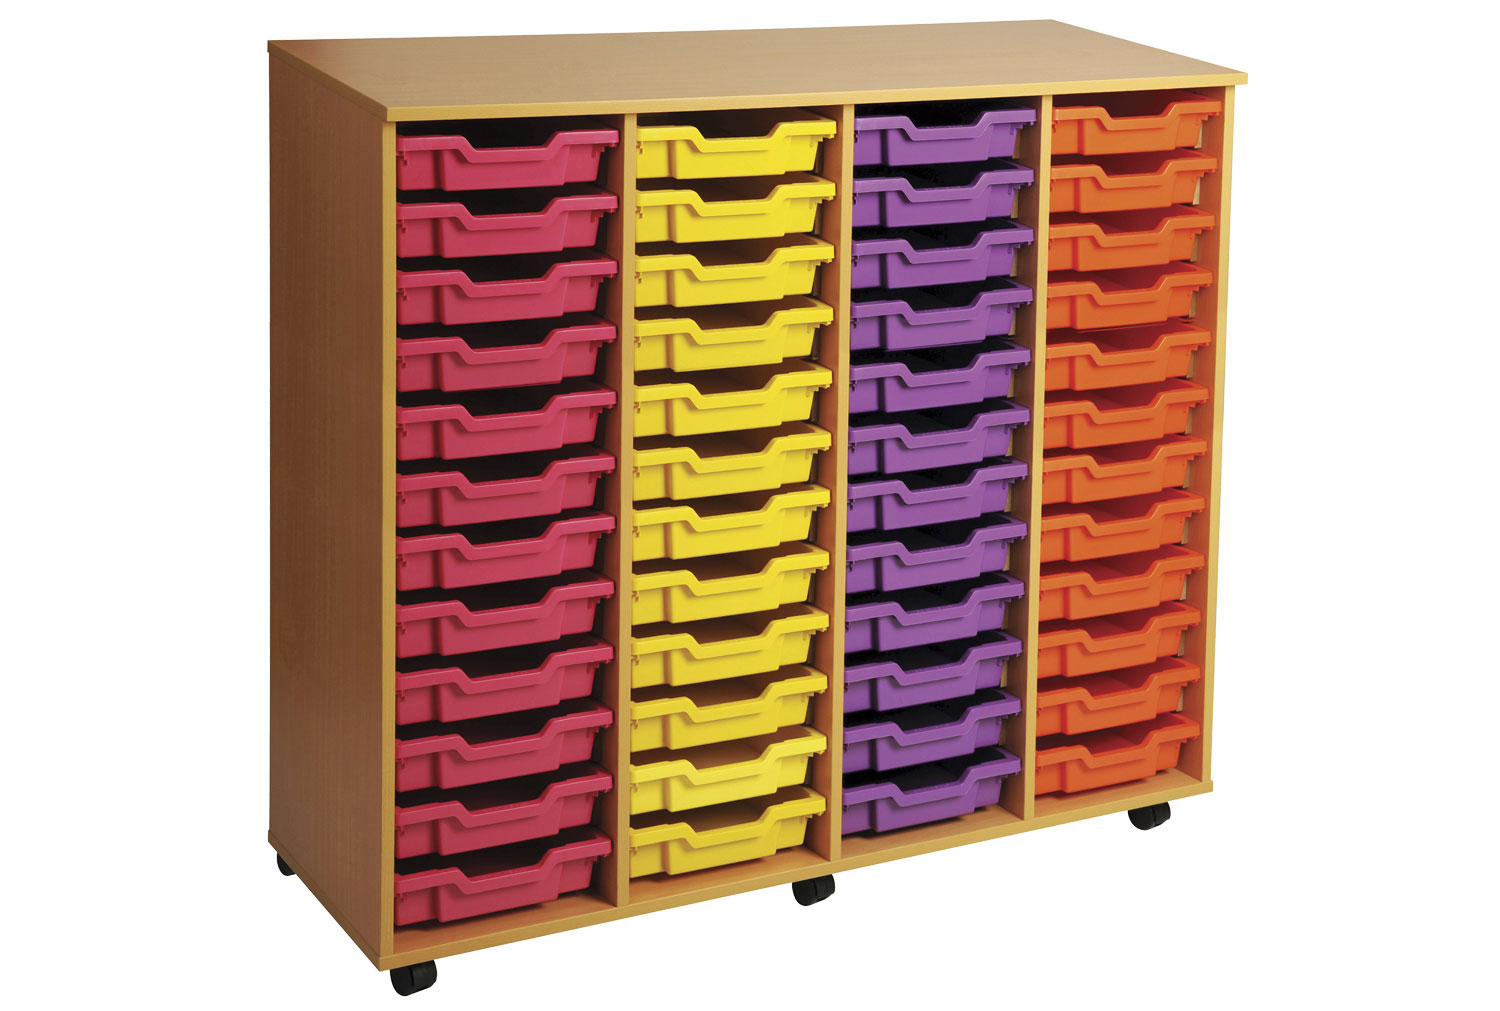 Primary 4 Column Mobile Classroom Tray Storage Unit With 48 Shallow Classroom Trays, Beech/ Blue Classroom Trays